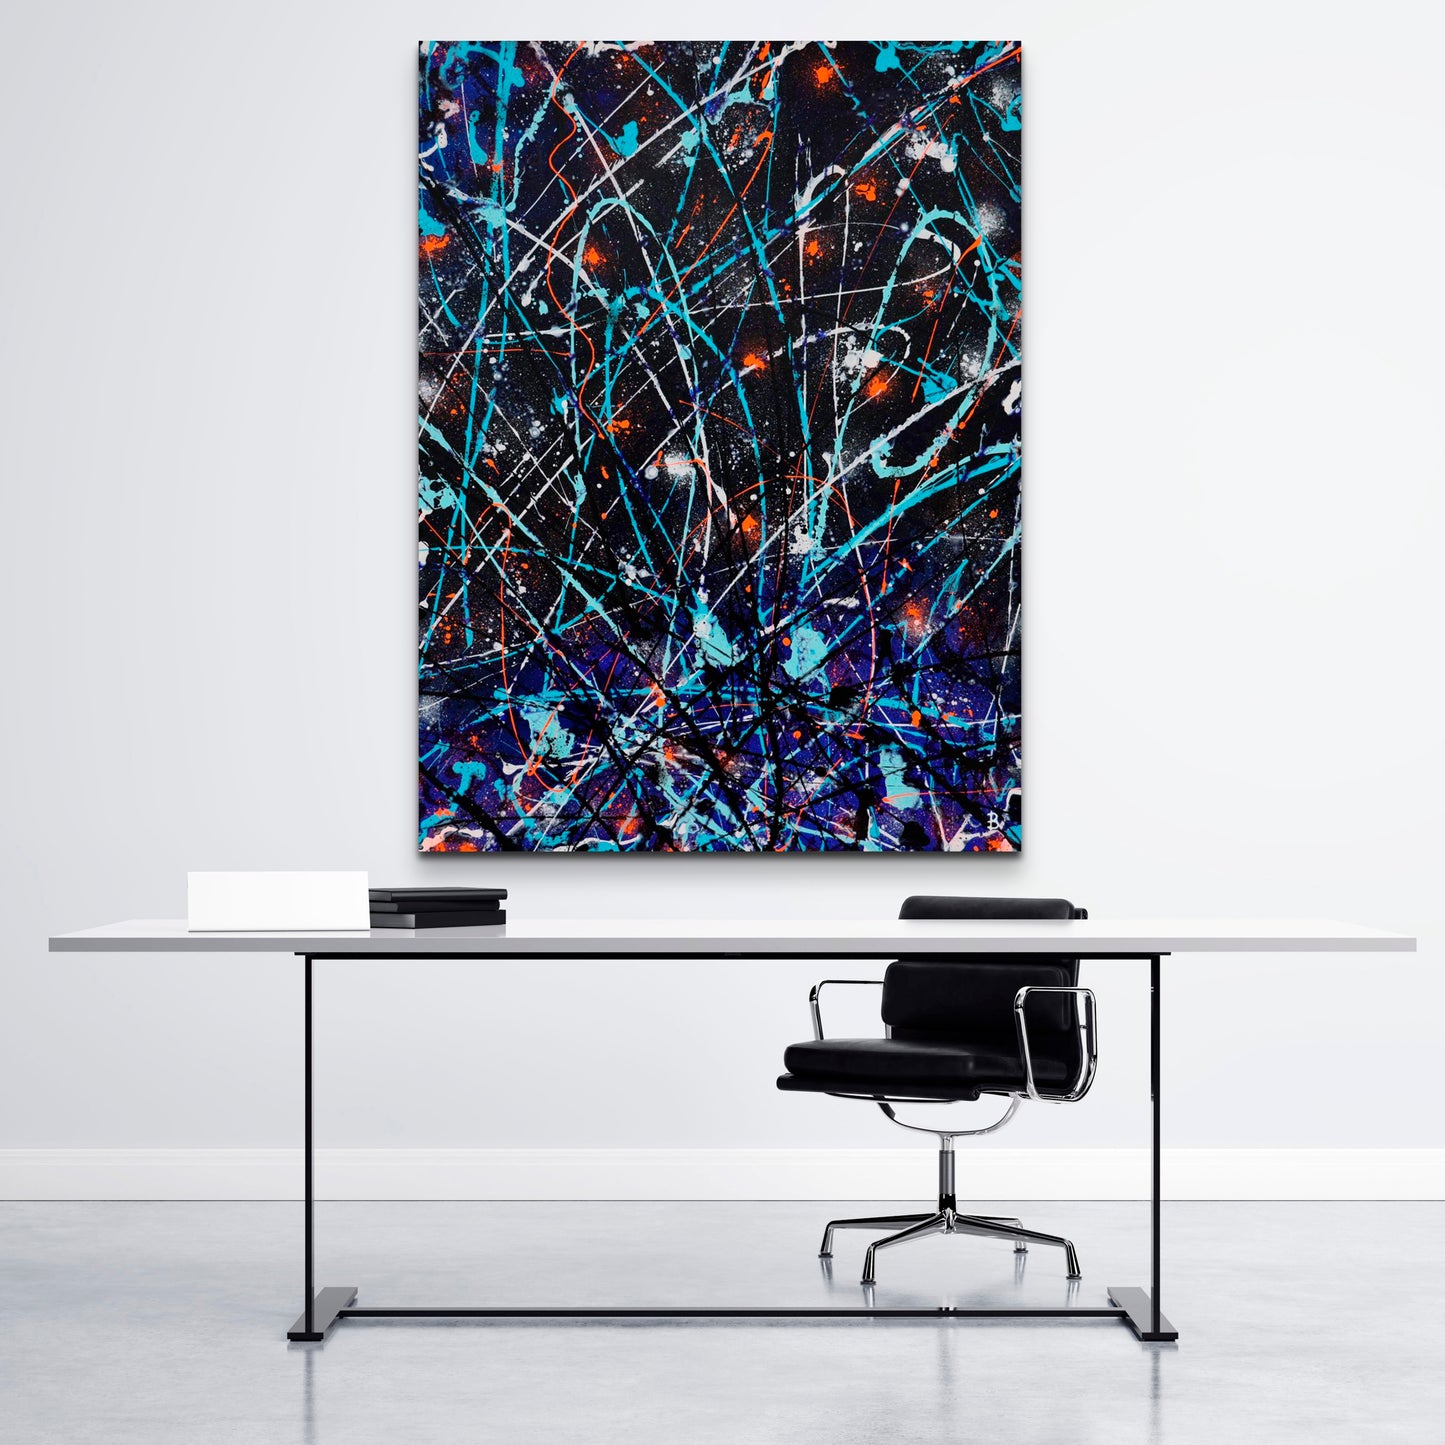 'Satellite' original Abstract Expressionism Painting by Bridget Bradley, seen hanging unframed in office space. Find out more